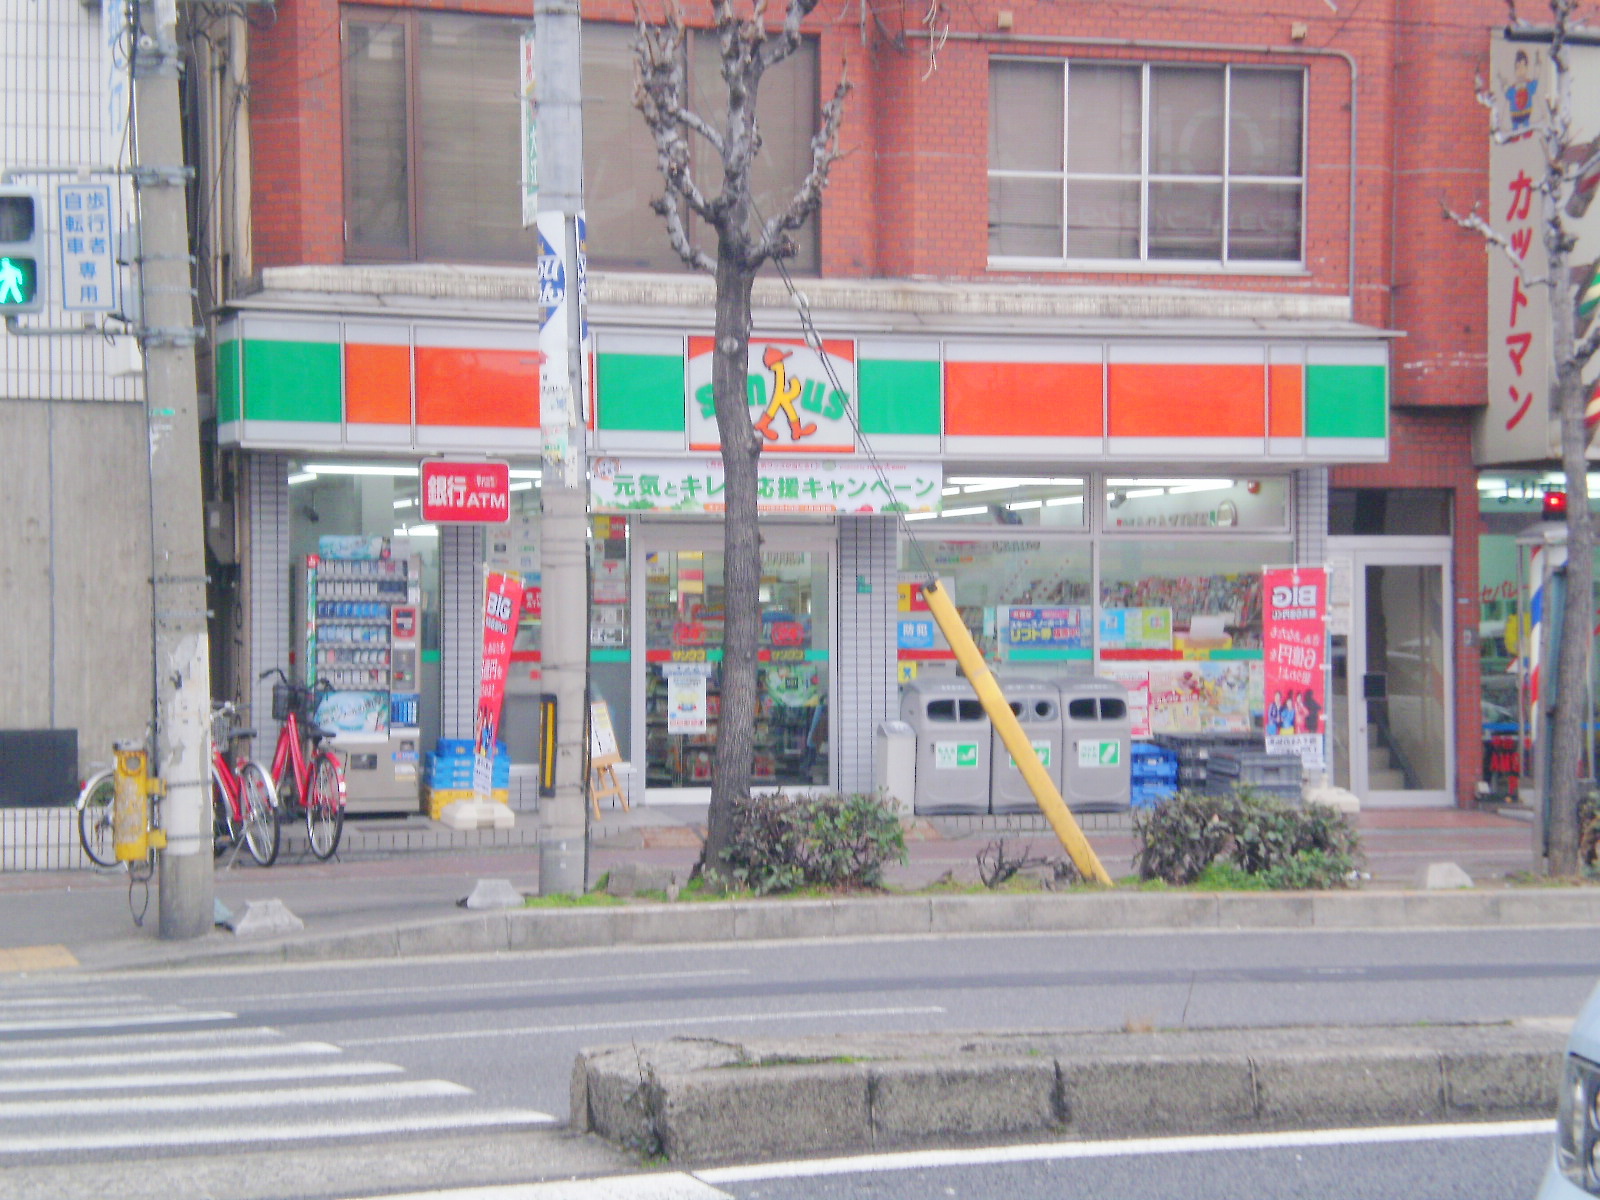 Convenience store. 437m until Thanksgiving Kire 2-chome (convenience store)